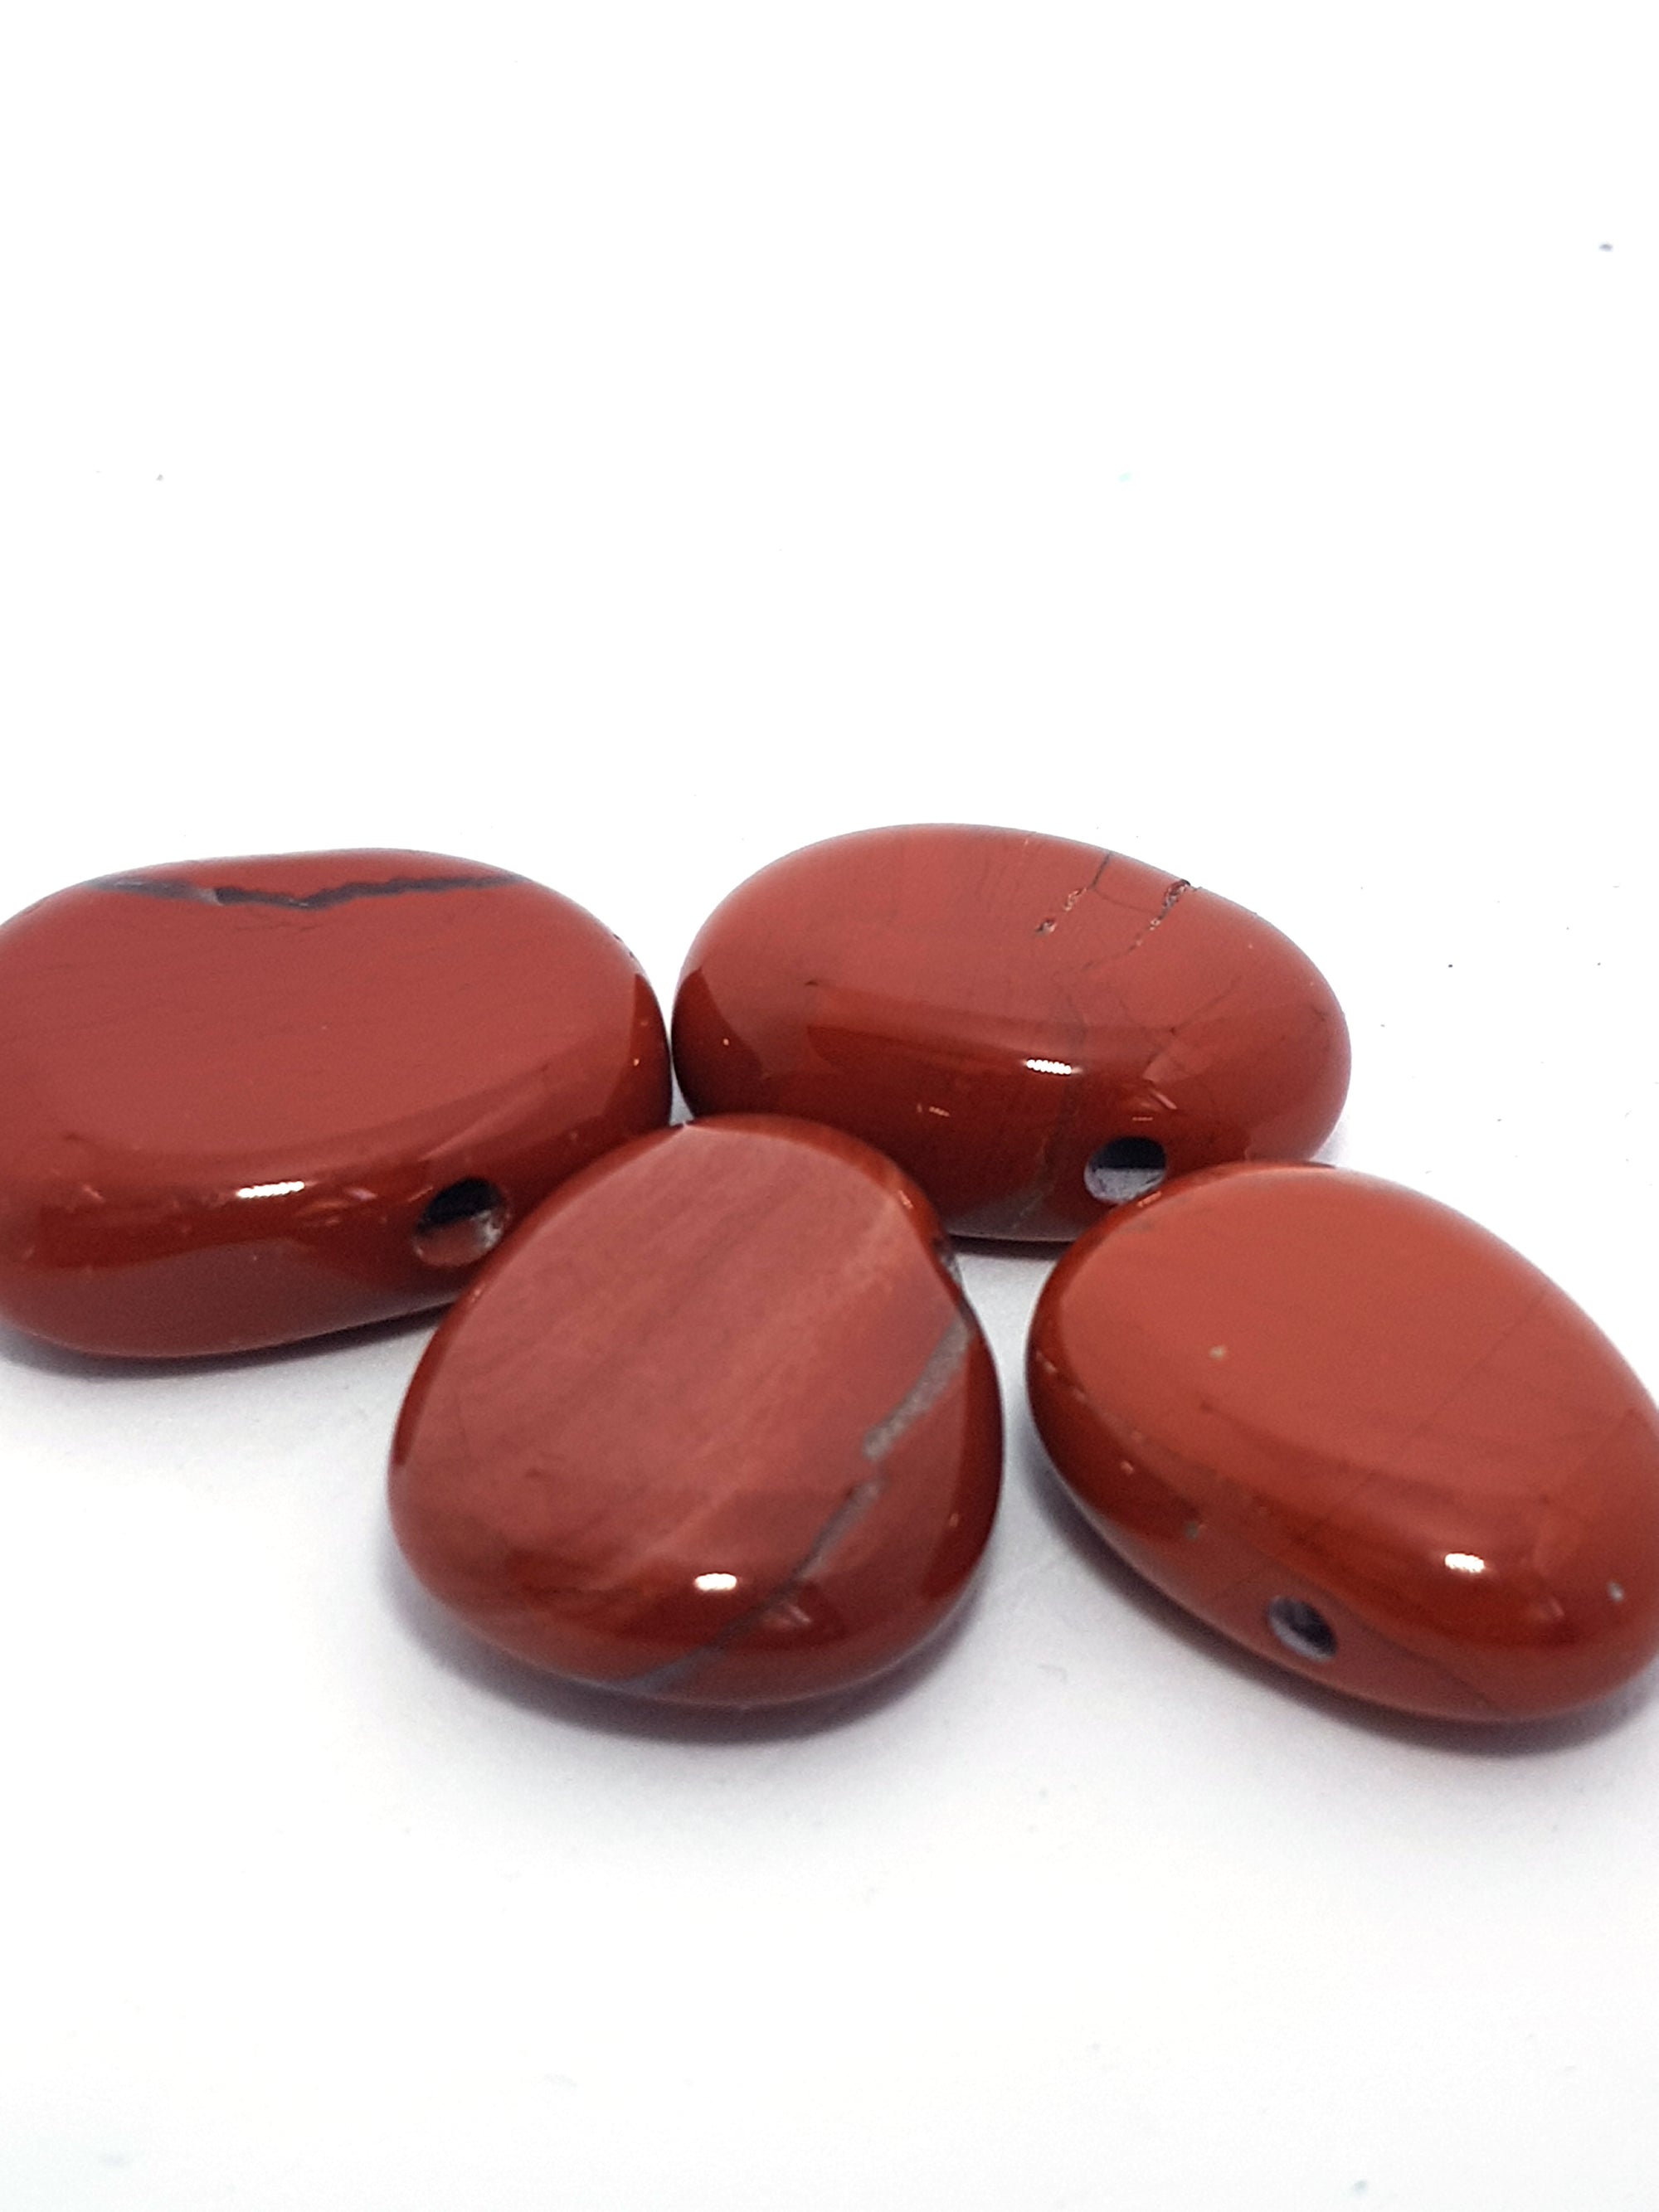 Red jasper drilled stone - The Science of Magic 